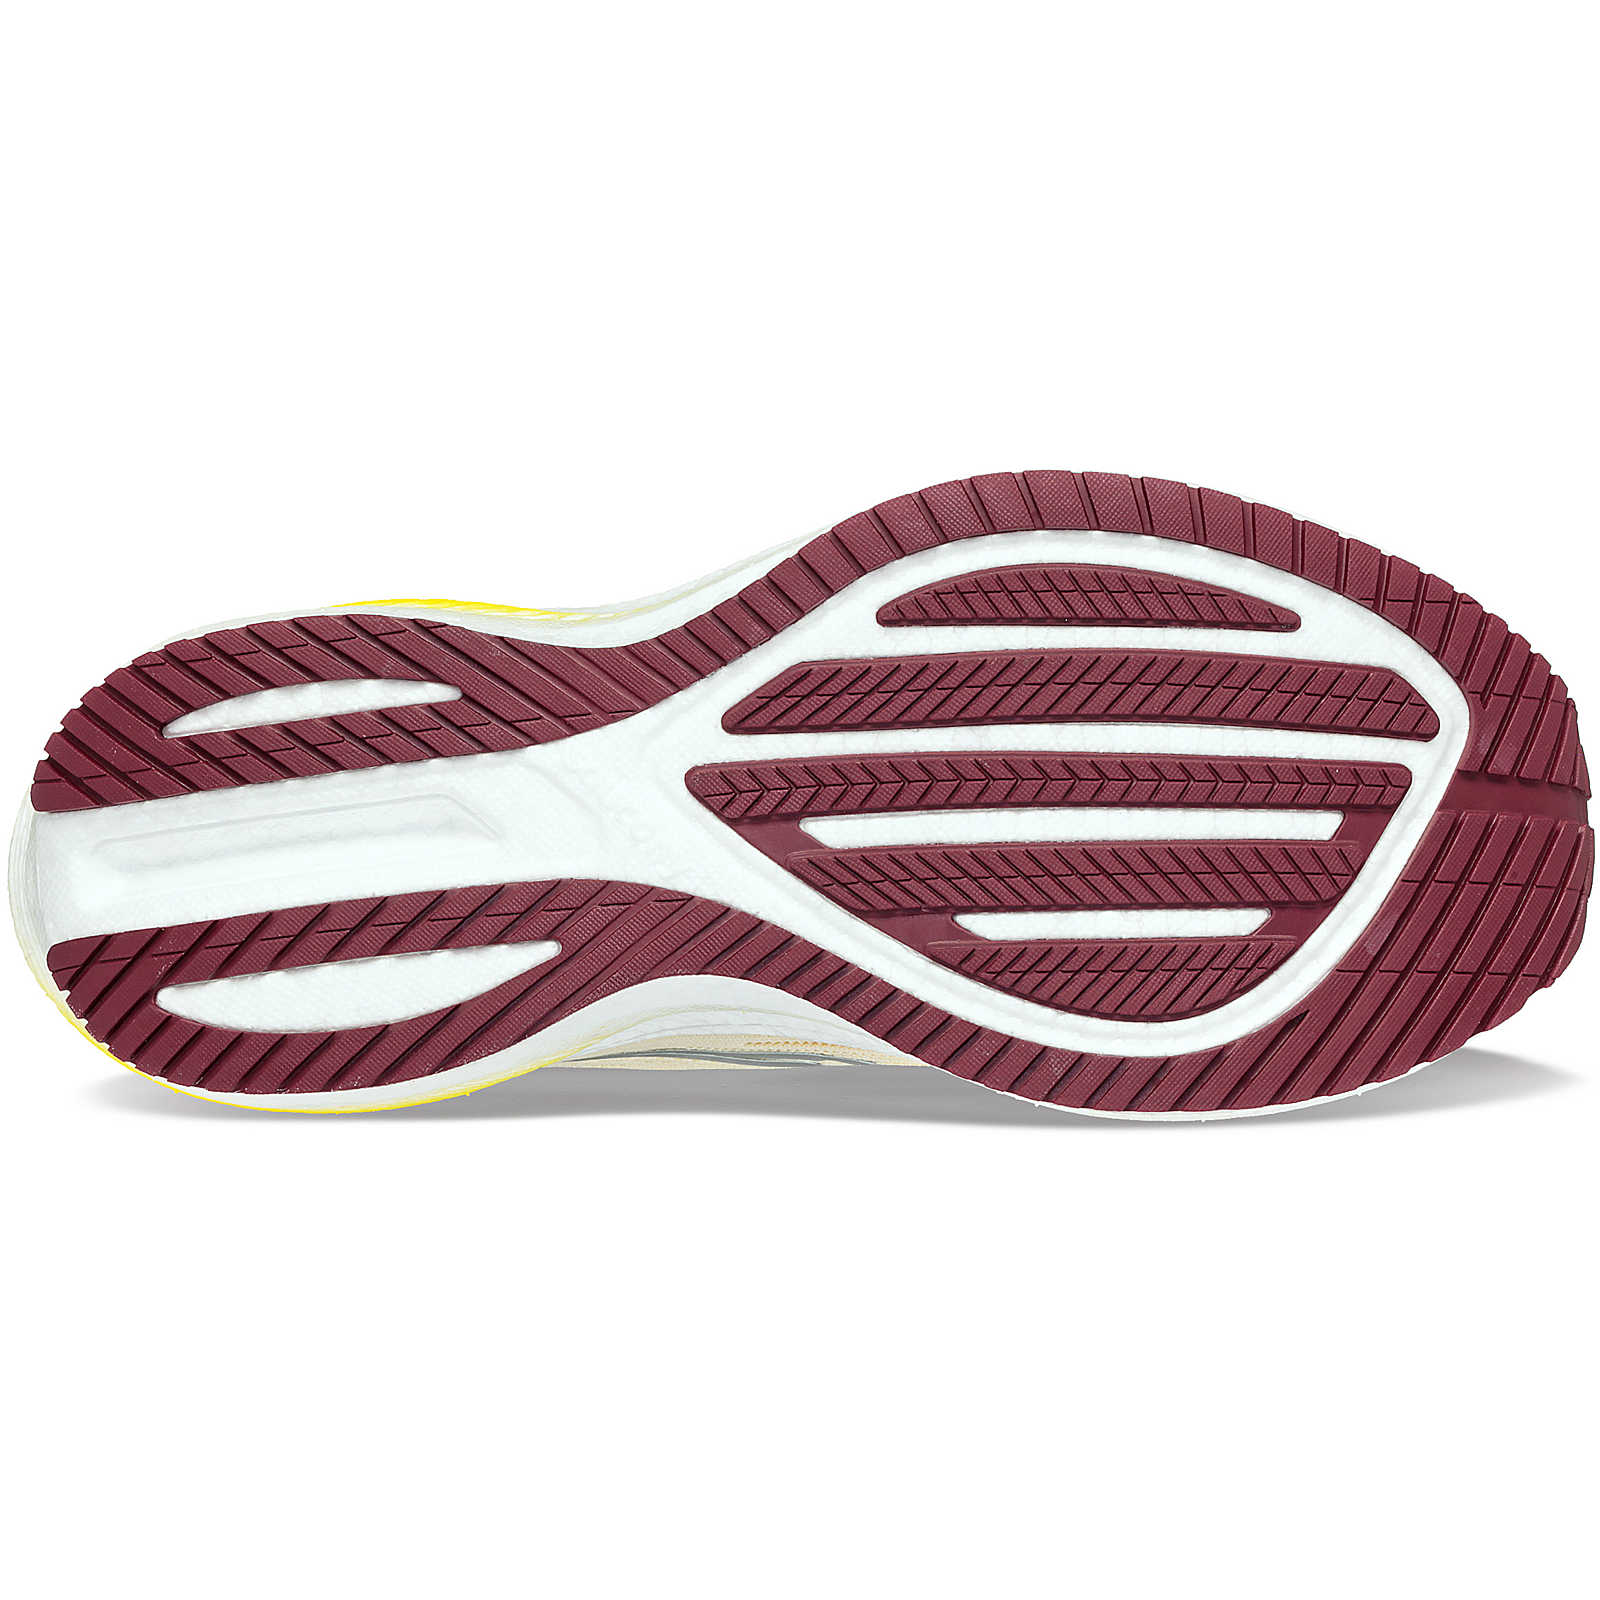 The outsole of teh Triumph 21 has strips of carbon rubber to provide traction and make them lighter